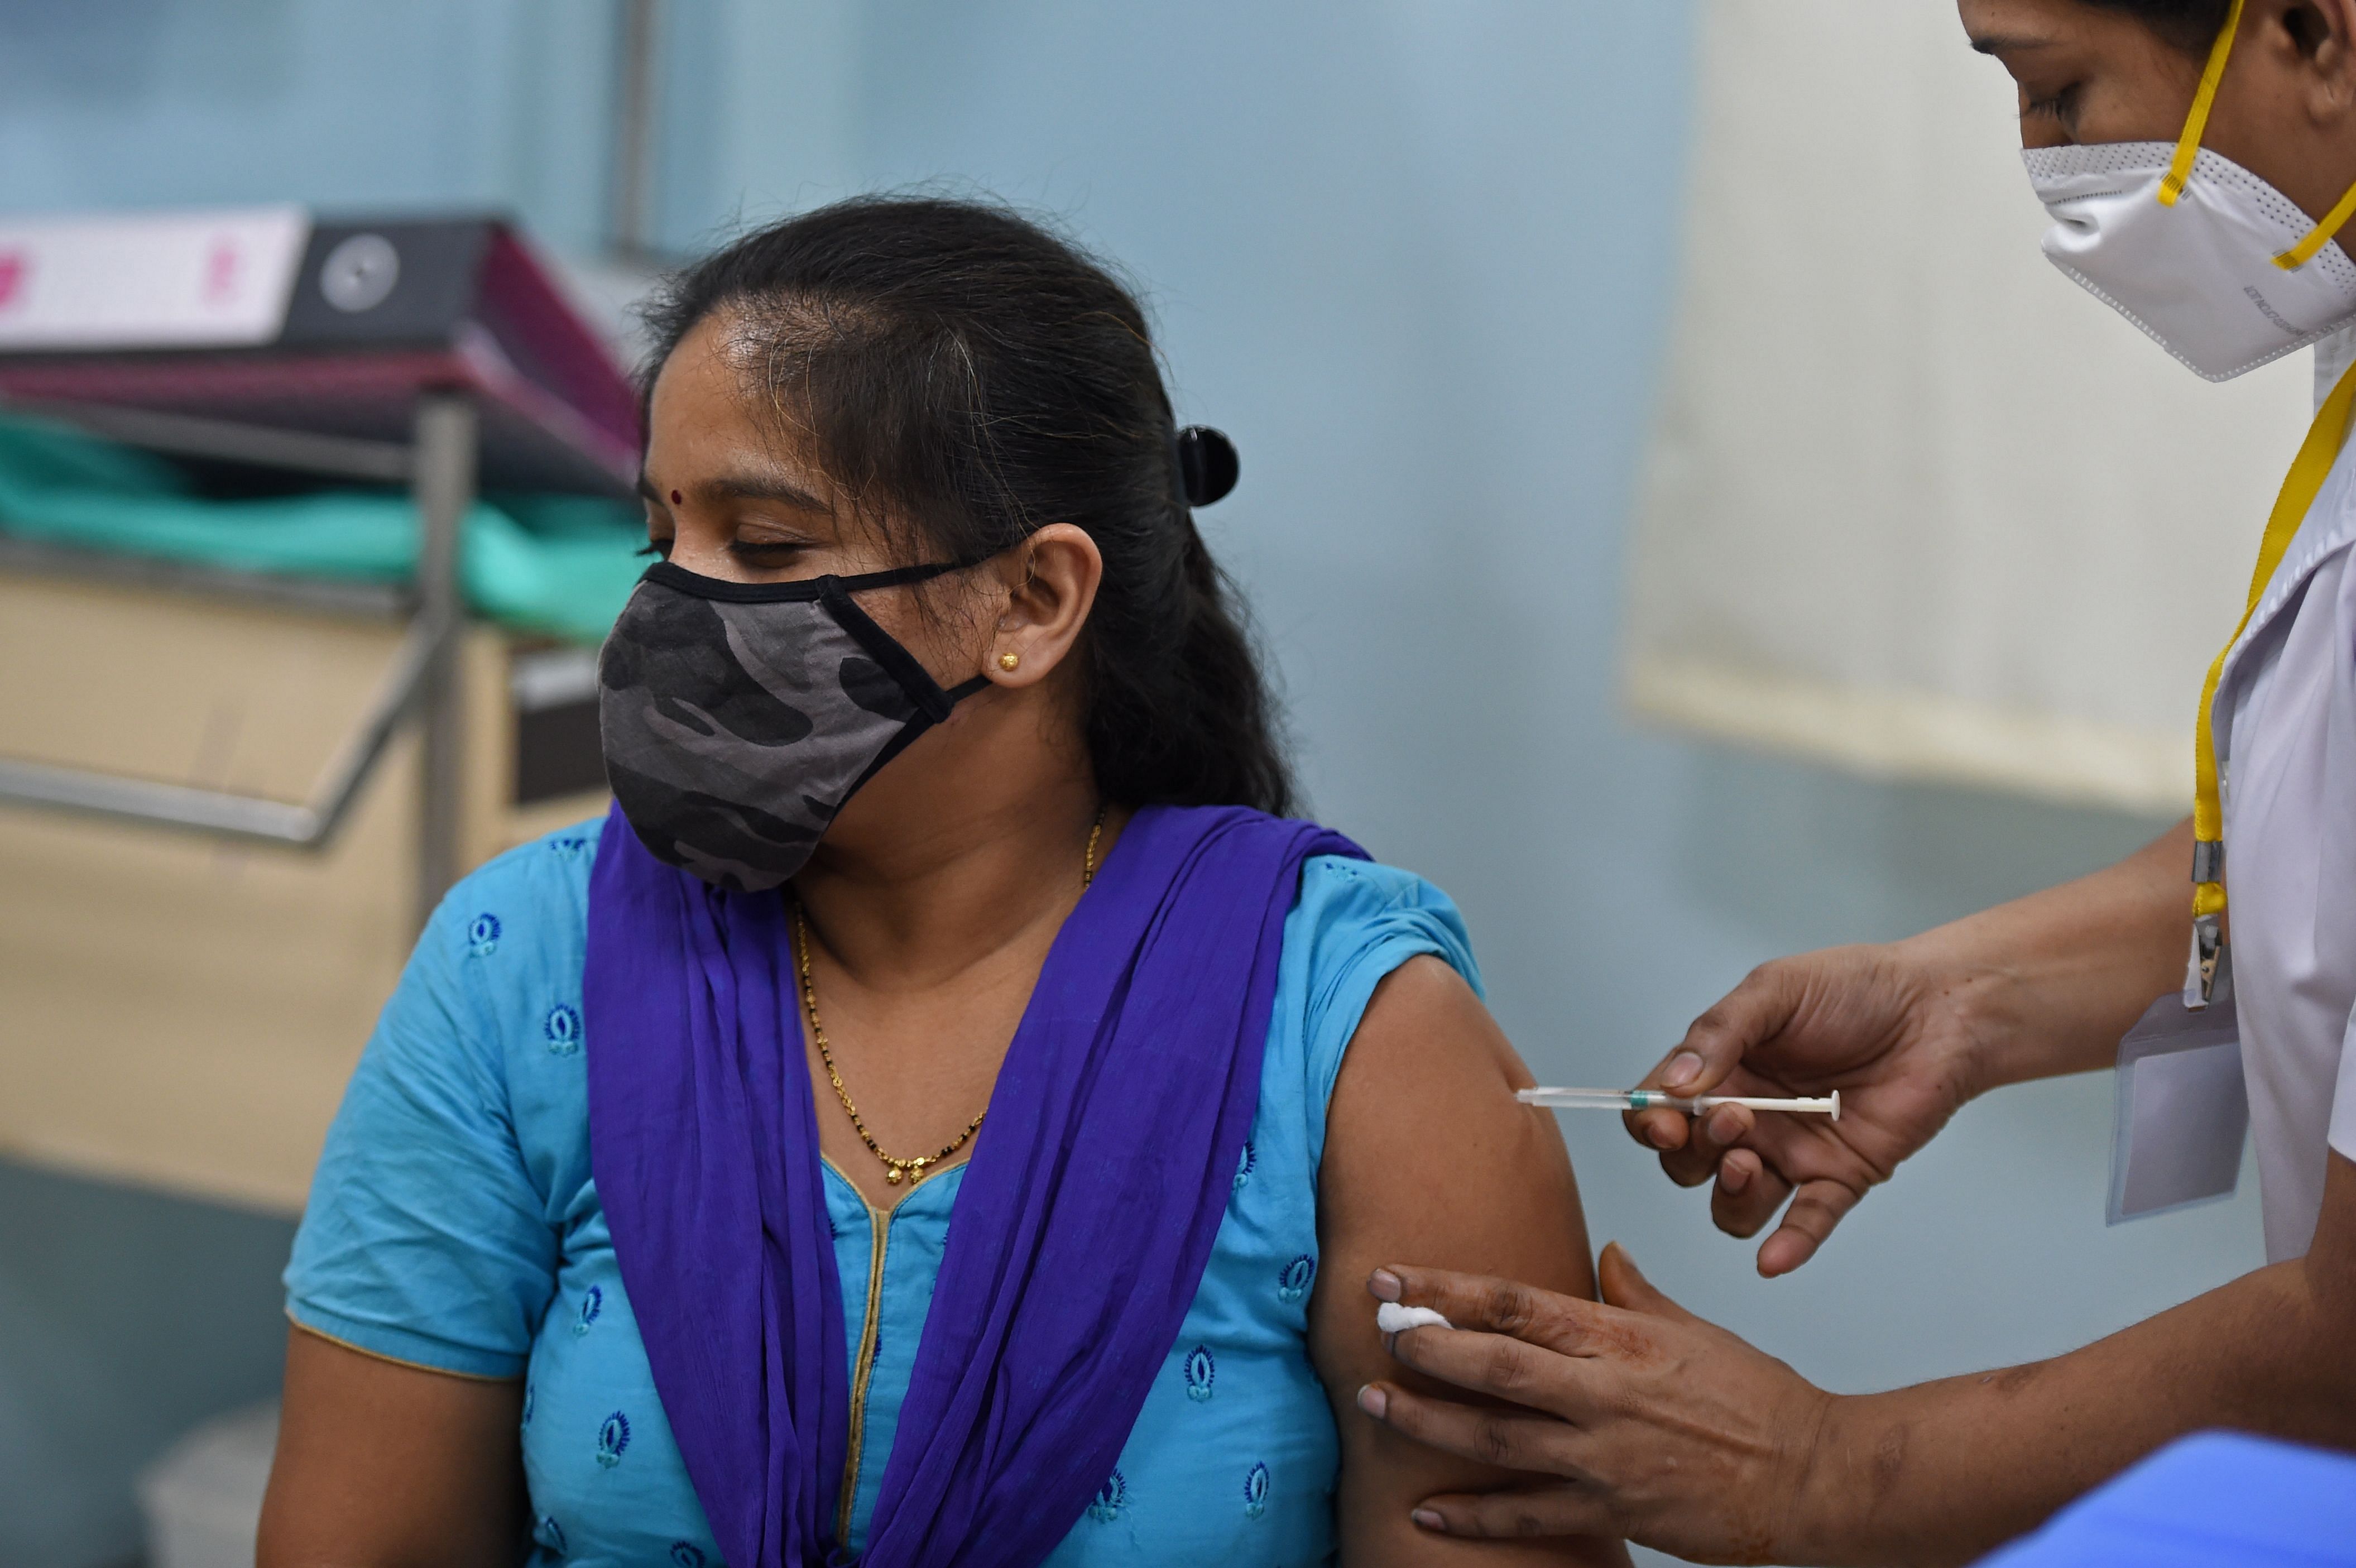 A medical worker inoculates a colleague with a Covid-19 coronavirus vaccine. Credit: AFP Photo